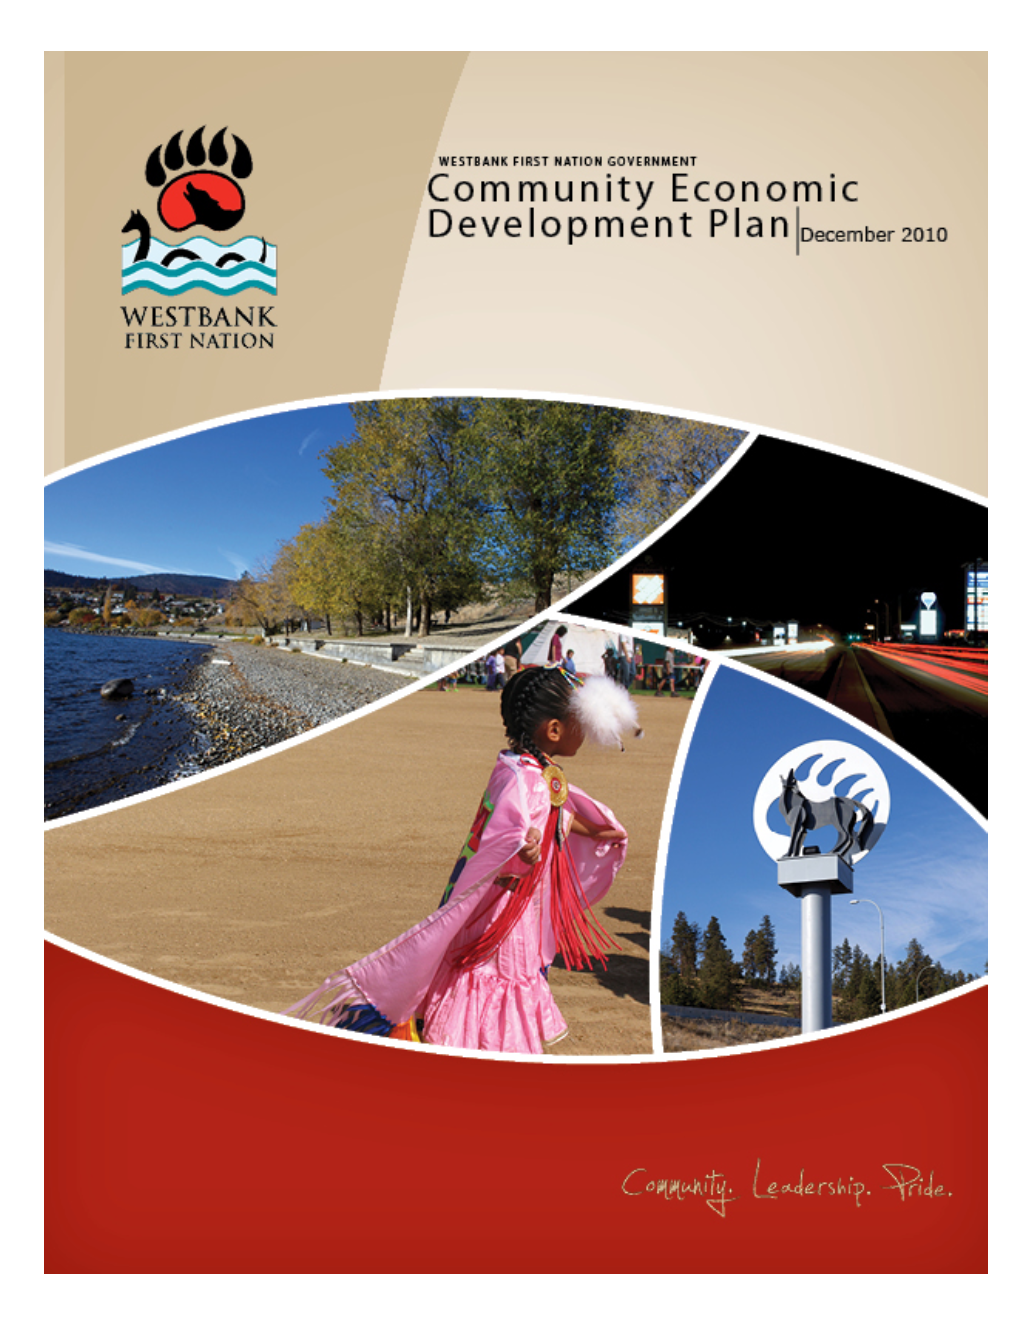 Community Economic Development Plan to Reconfirm And/Or Adjust the 2003 Economic Vision, Functions, Goals and Strategies for WFN